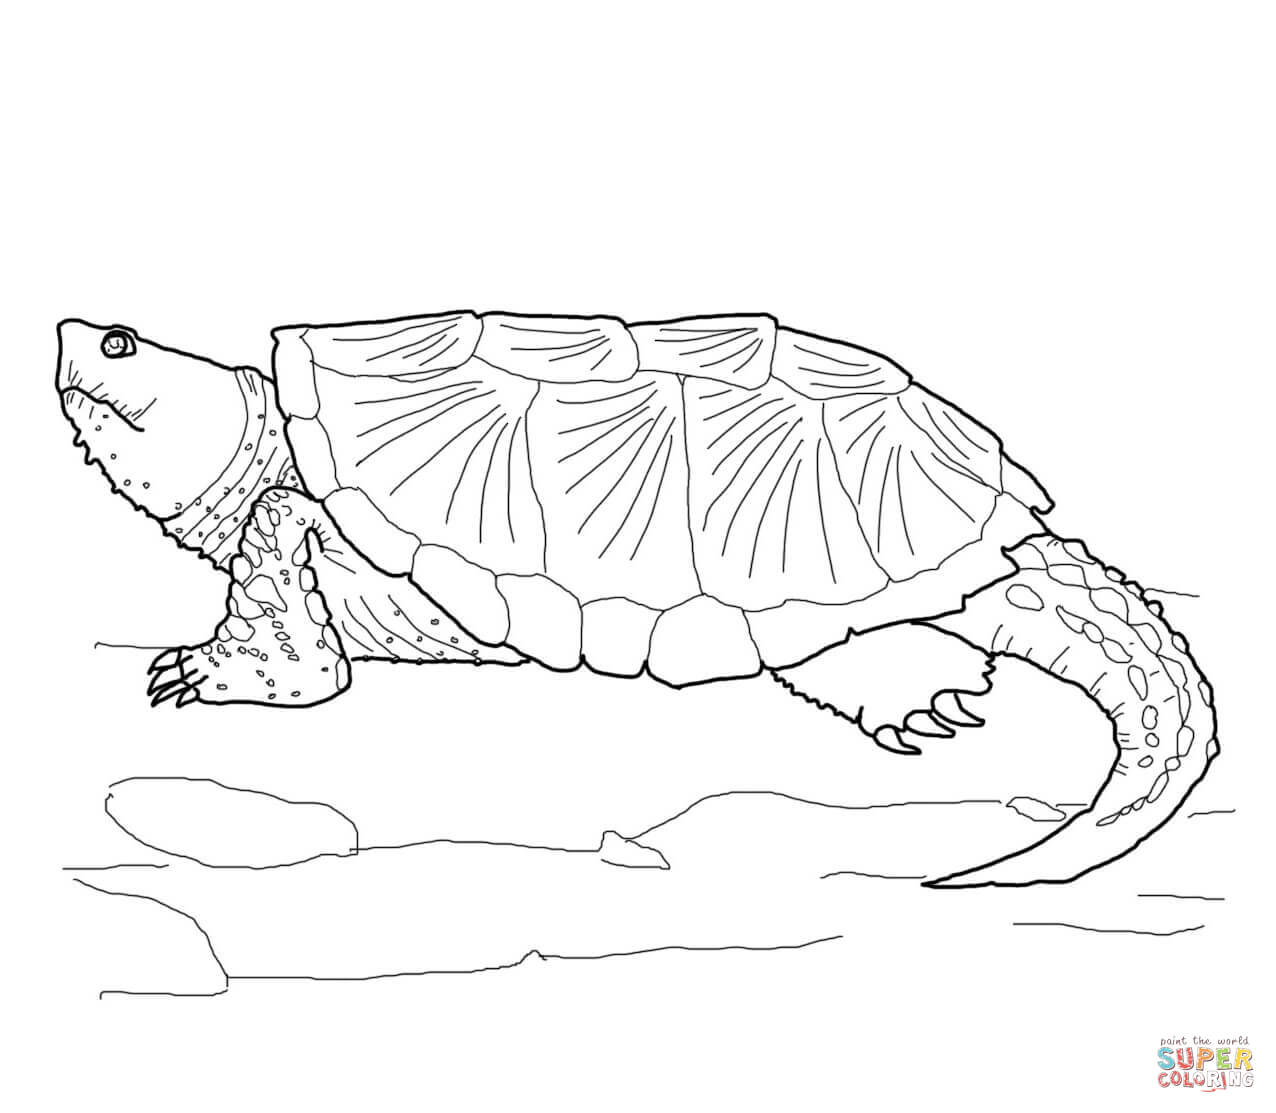 Alligator Snapping Turtle coloring #9, Download drawings